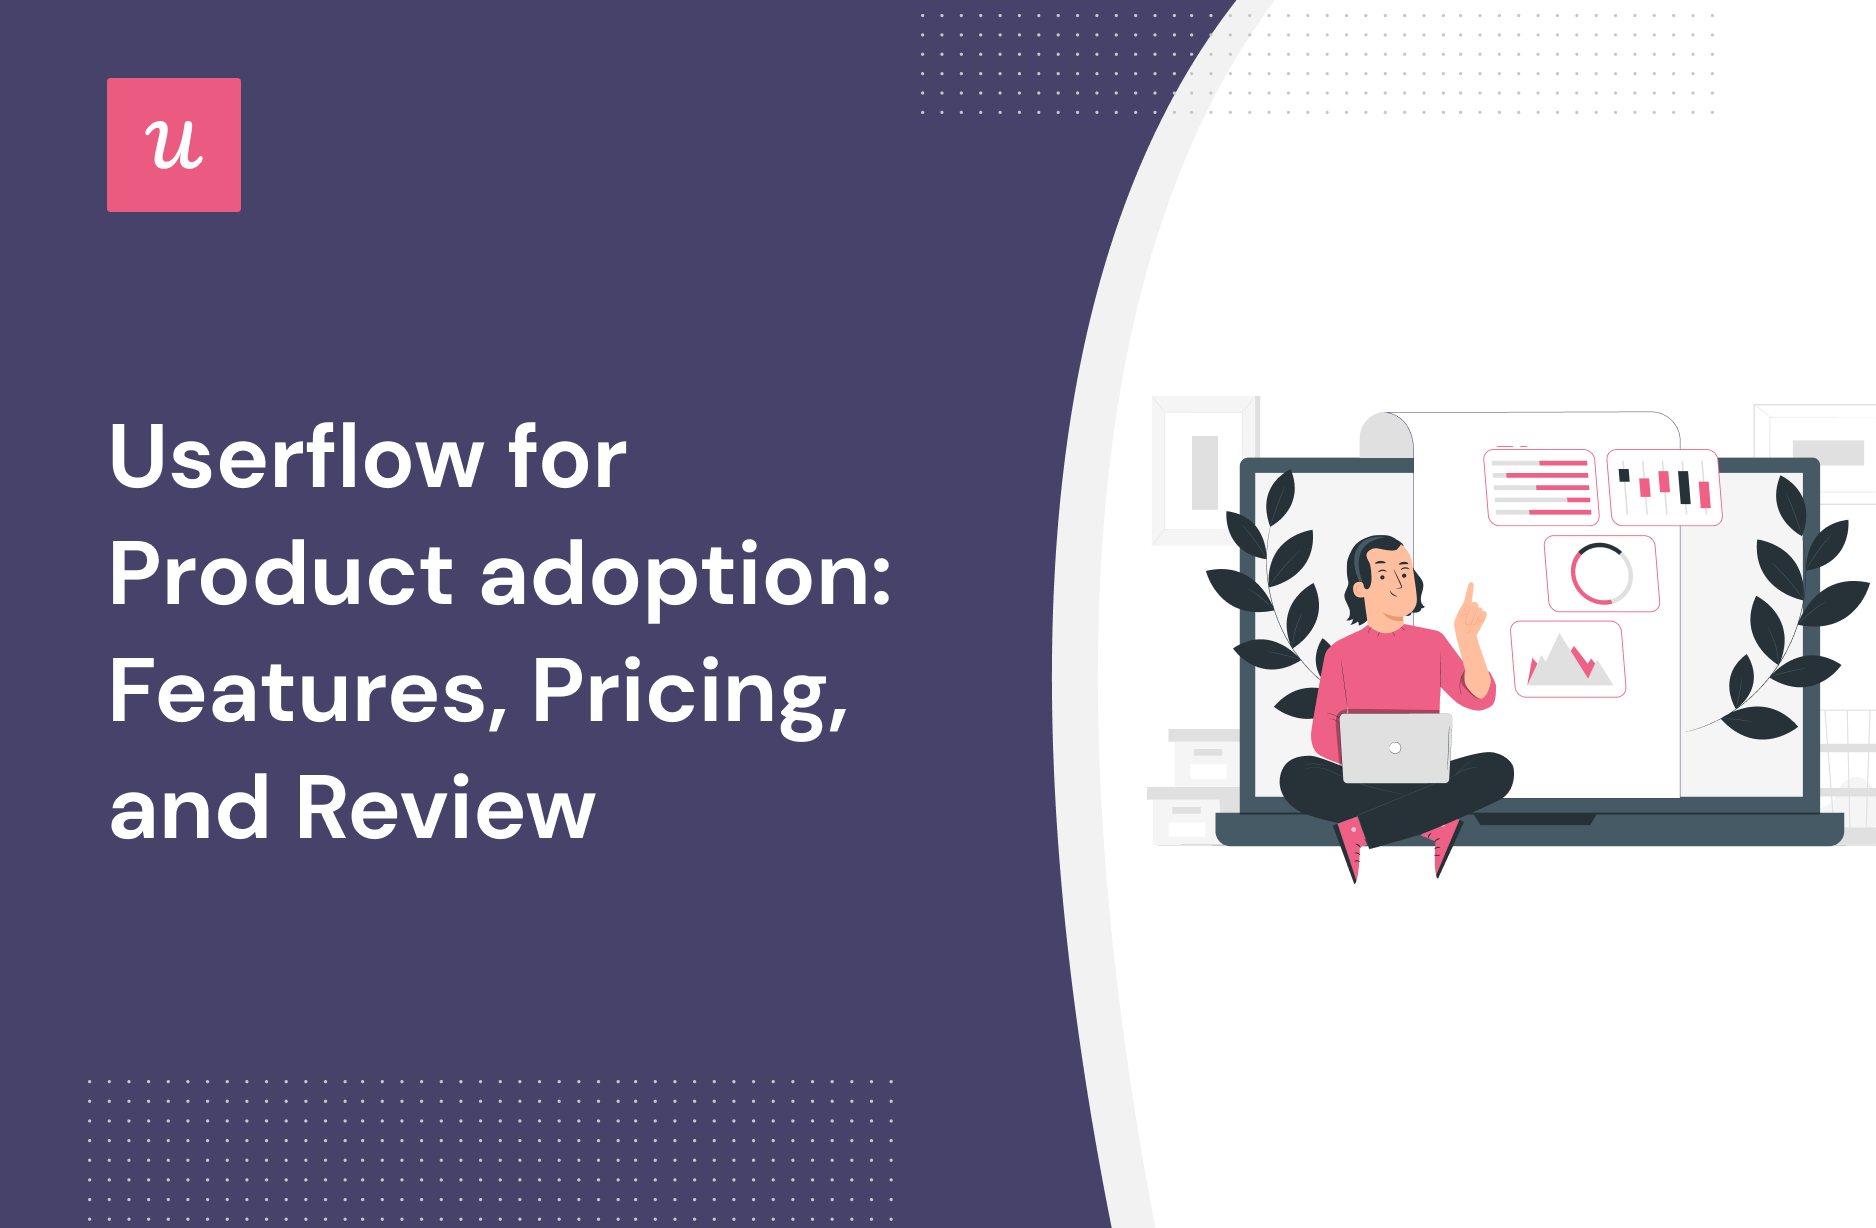 Userflow for Product adoption: Features, Pricing, and Review